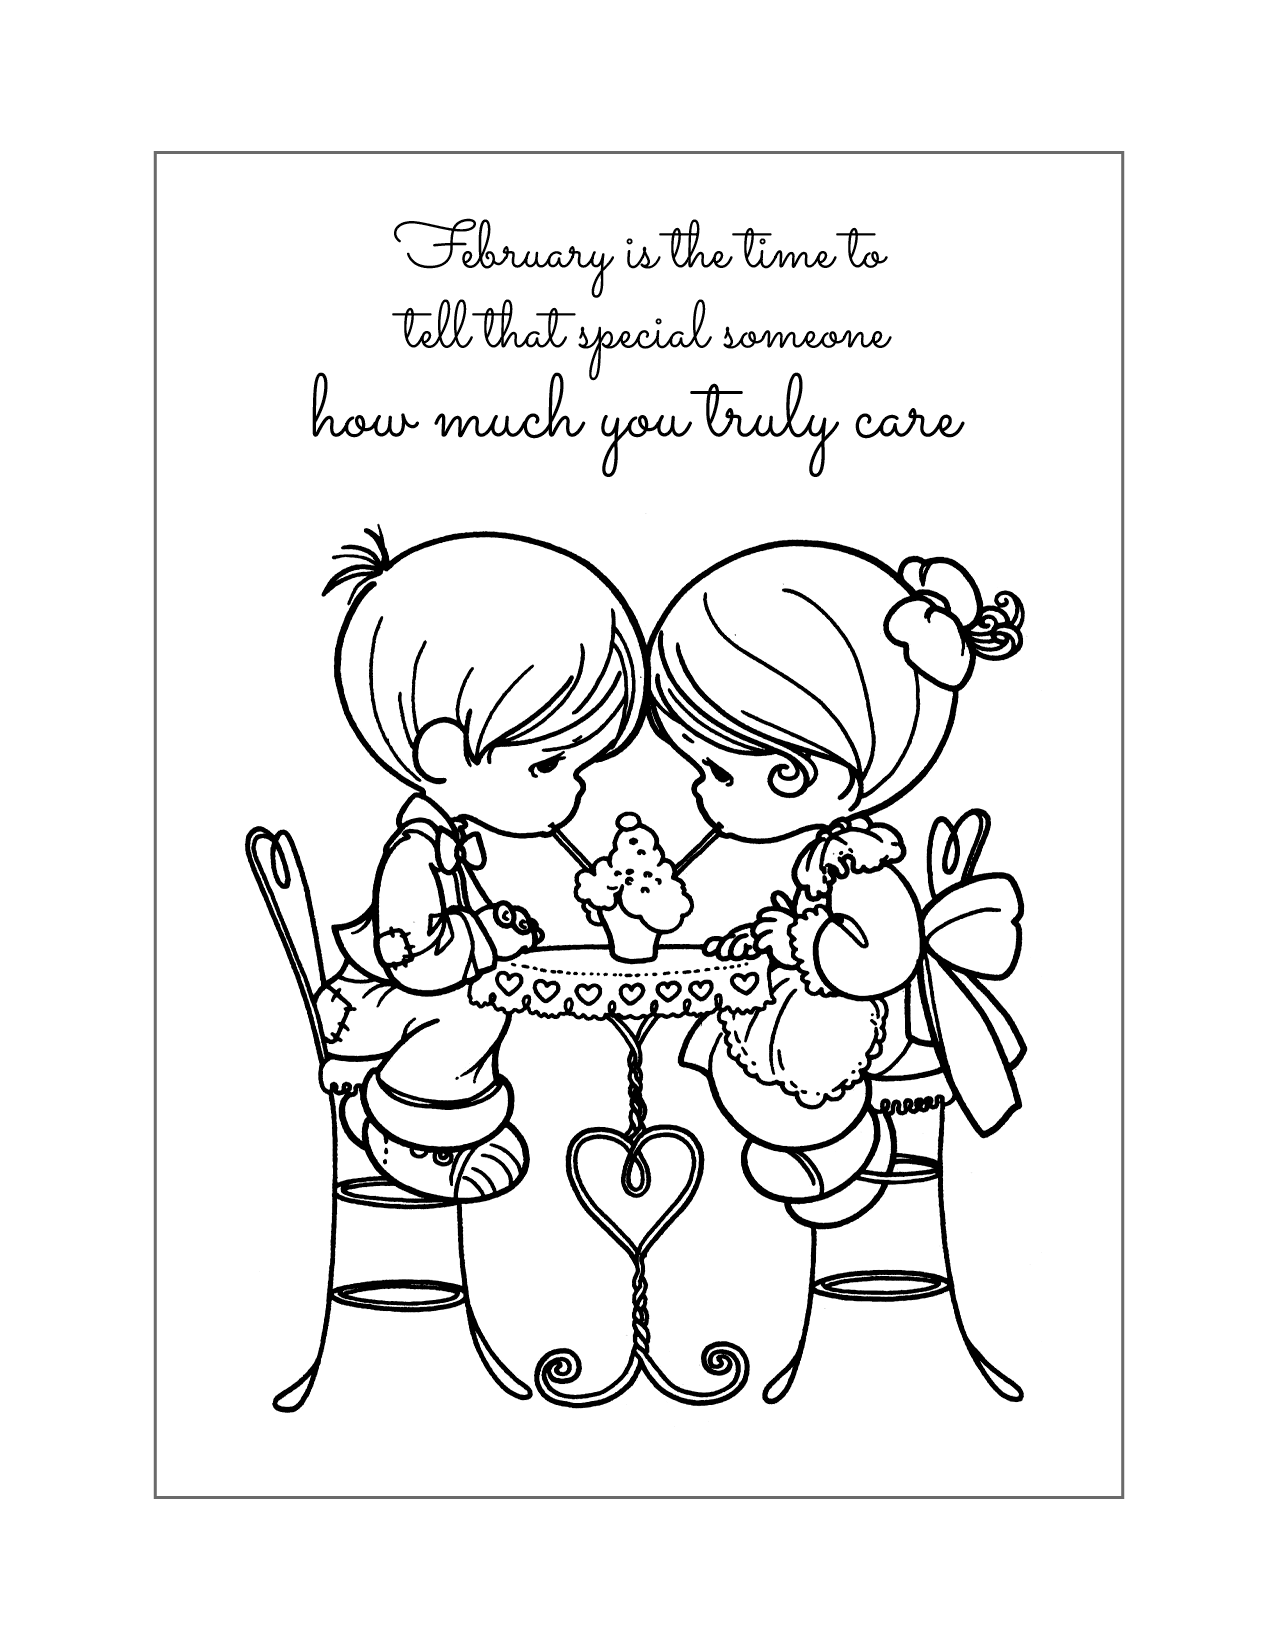 How Much You Care February Coloring Page